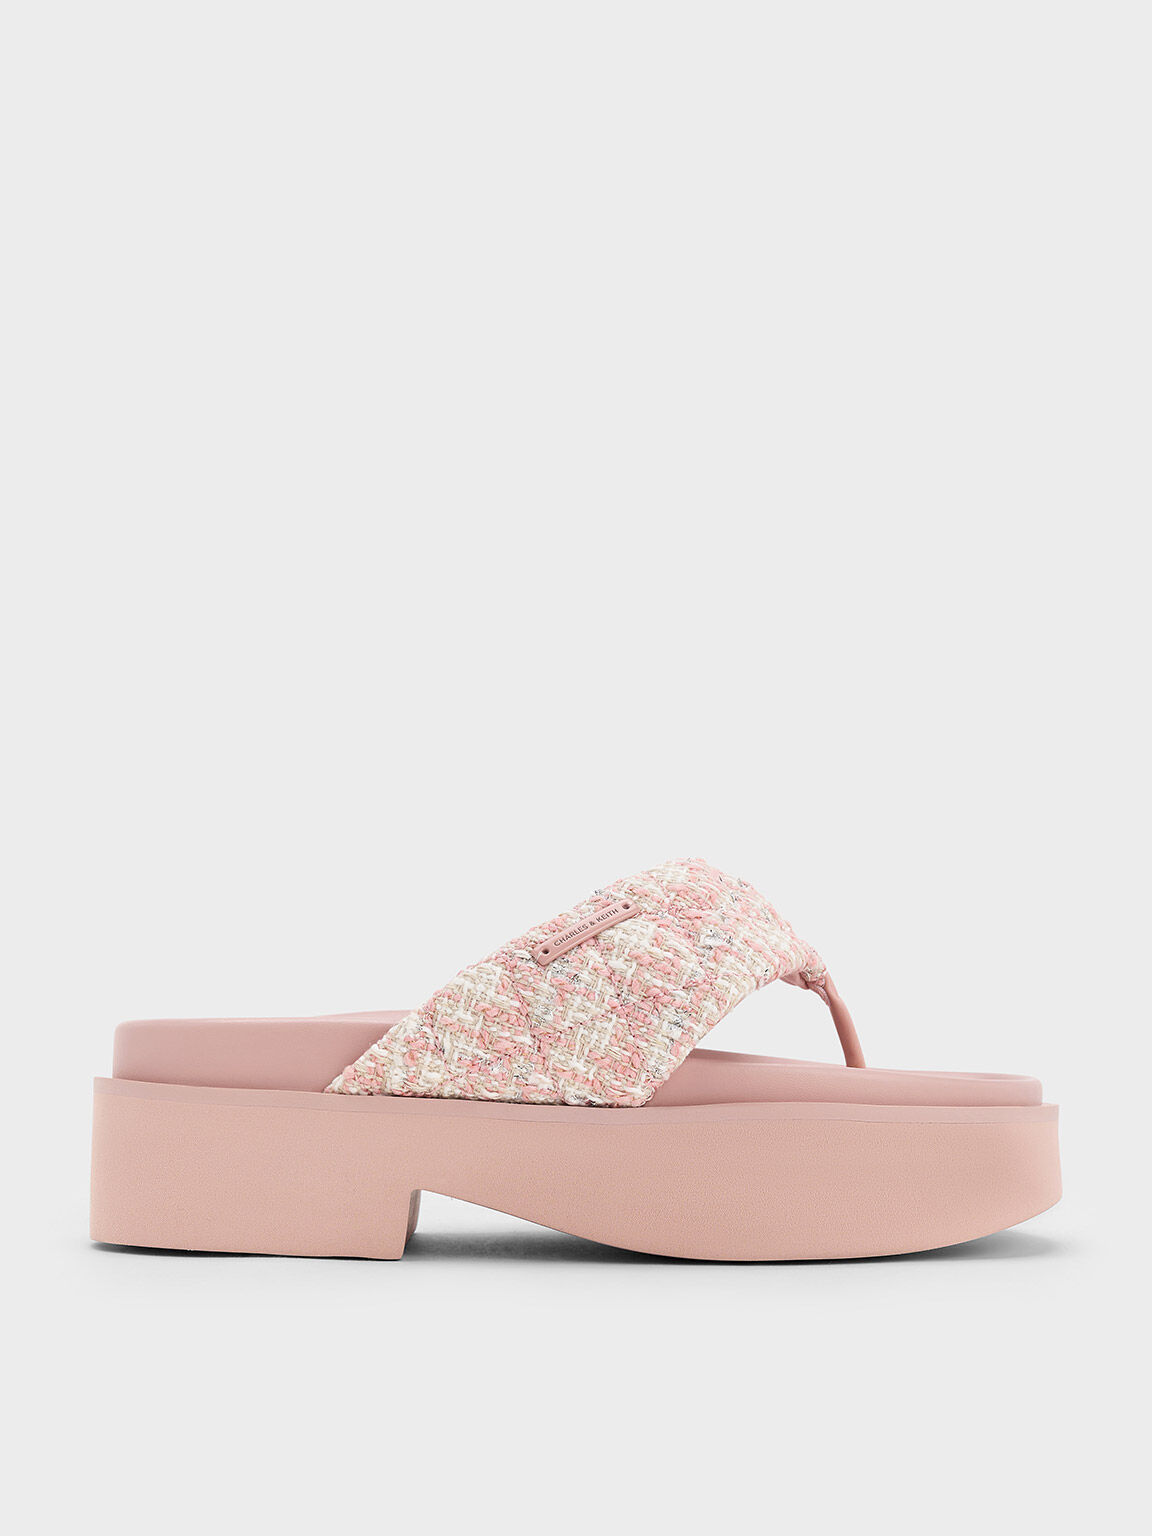 Women's Sandals | Shop Exclusive Styles | CHARLES & KEITH International